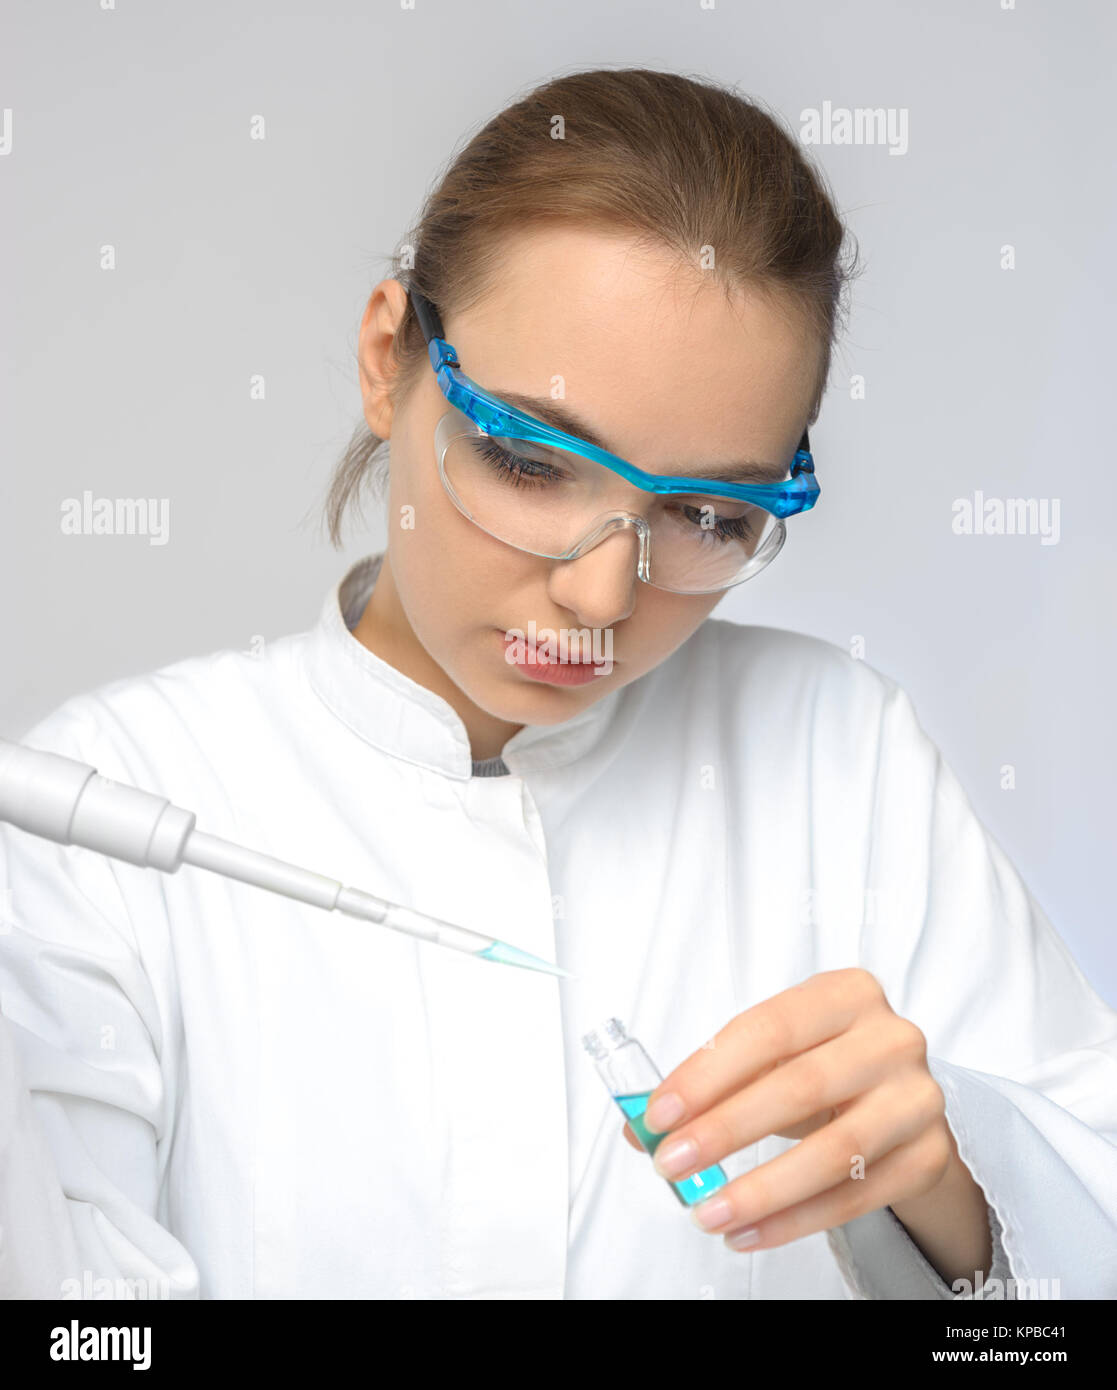 Young female tech or scientist loads sample with automatic pipette Stock Photo